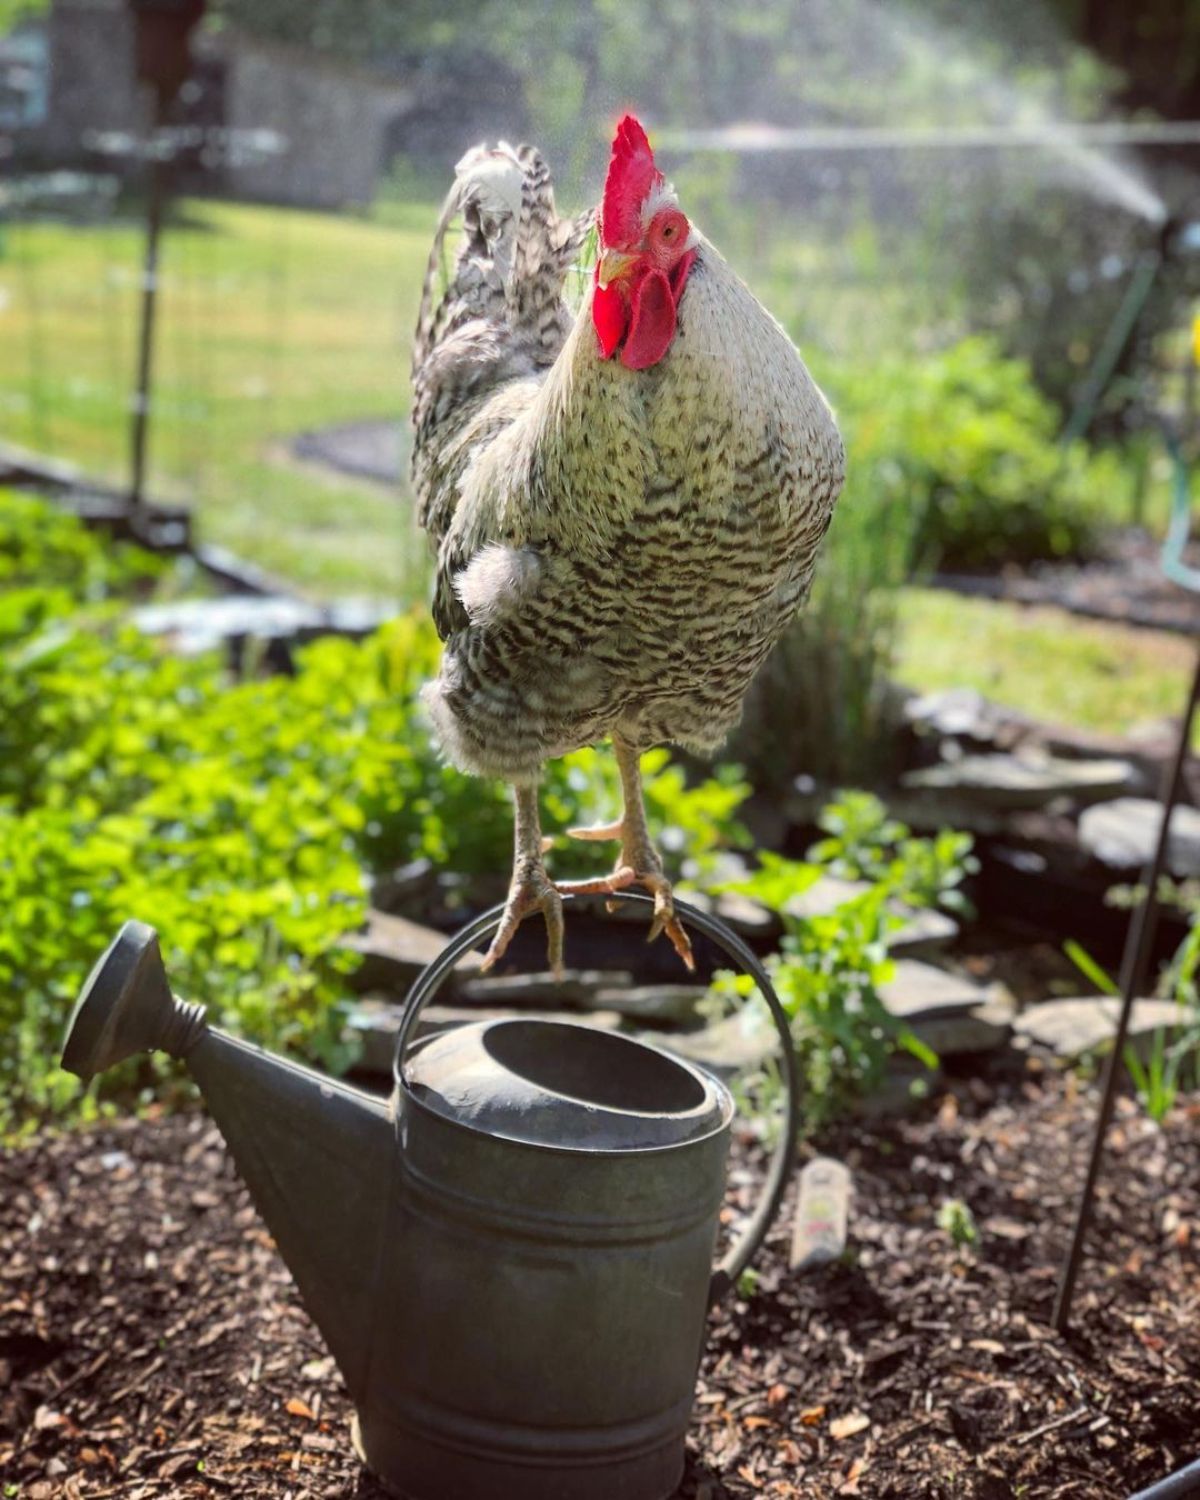 An adorable barred Holland rooster perched on a metal watering can.